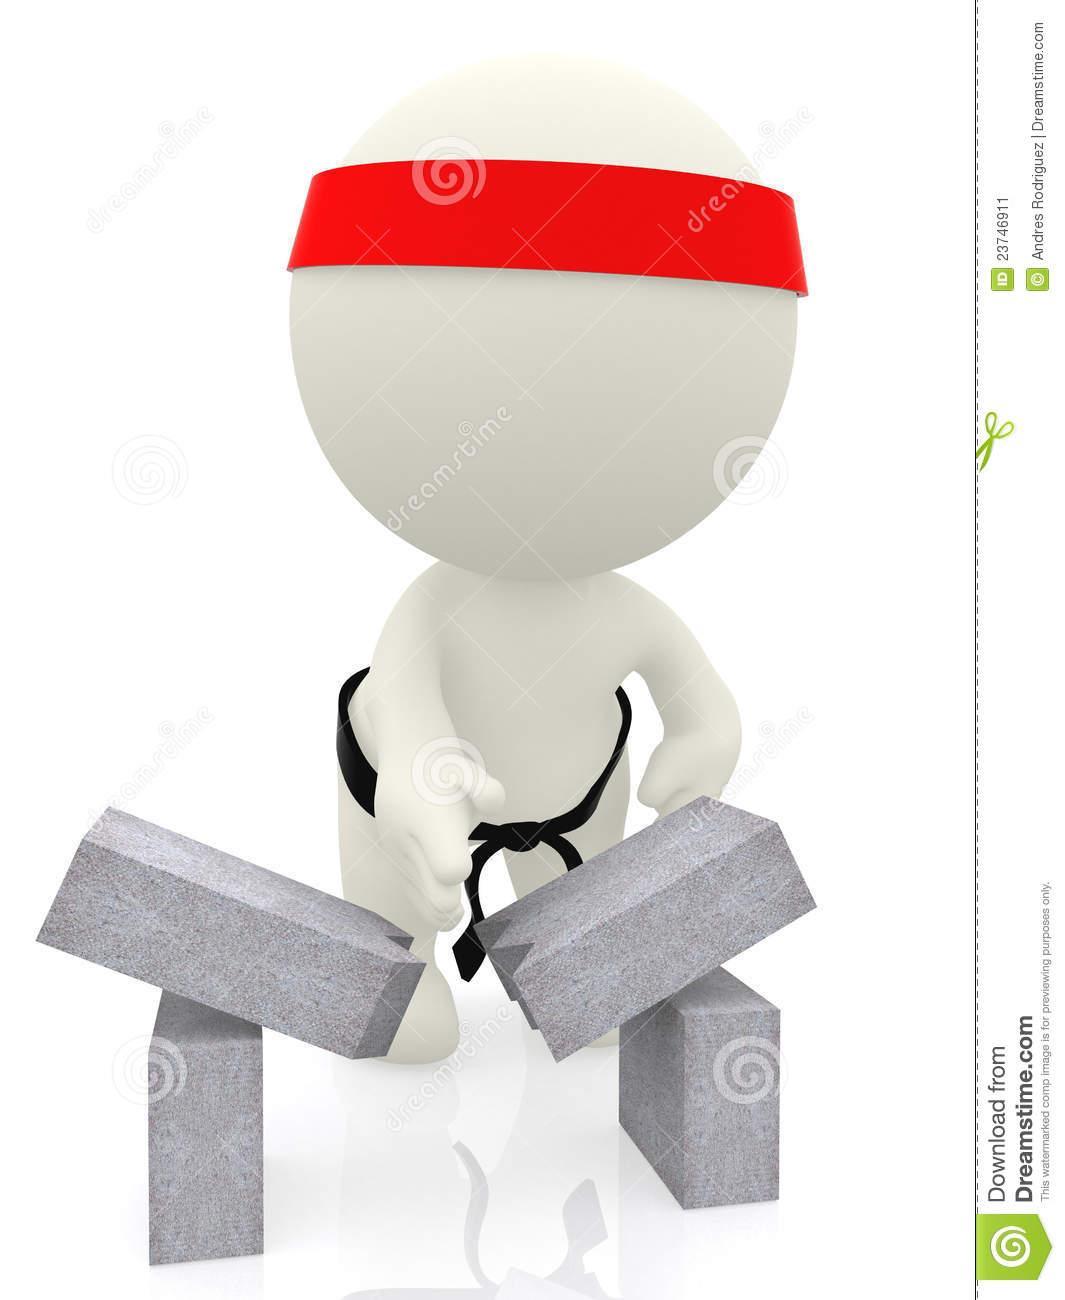 3d Karate Expert Breaking A Brick   Isolated Over A White Background